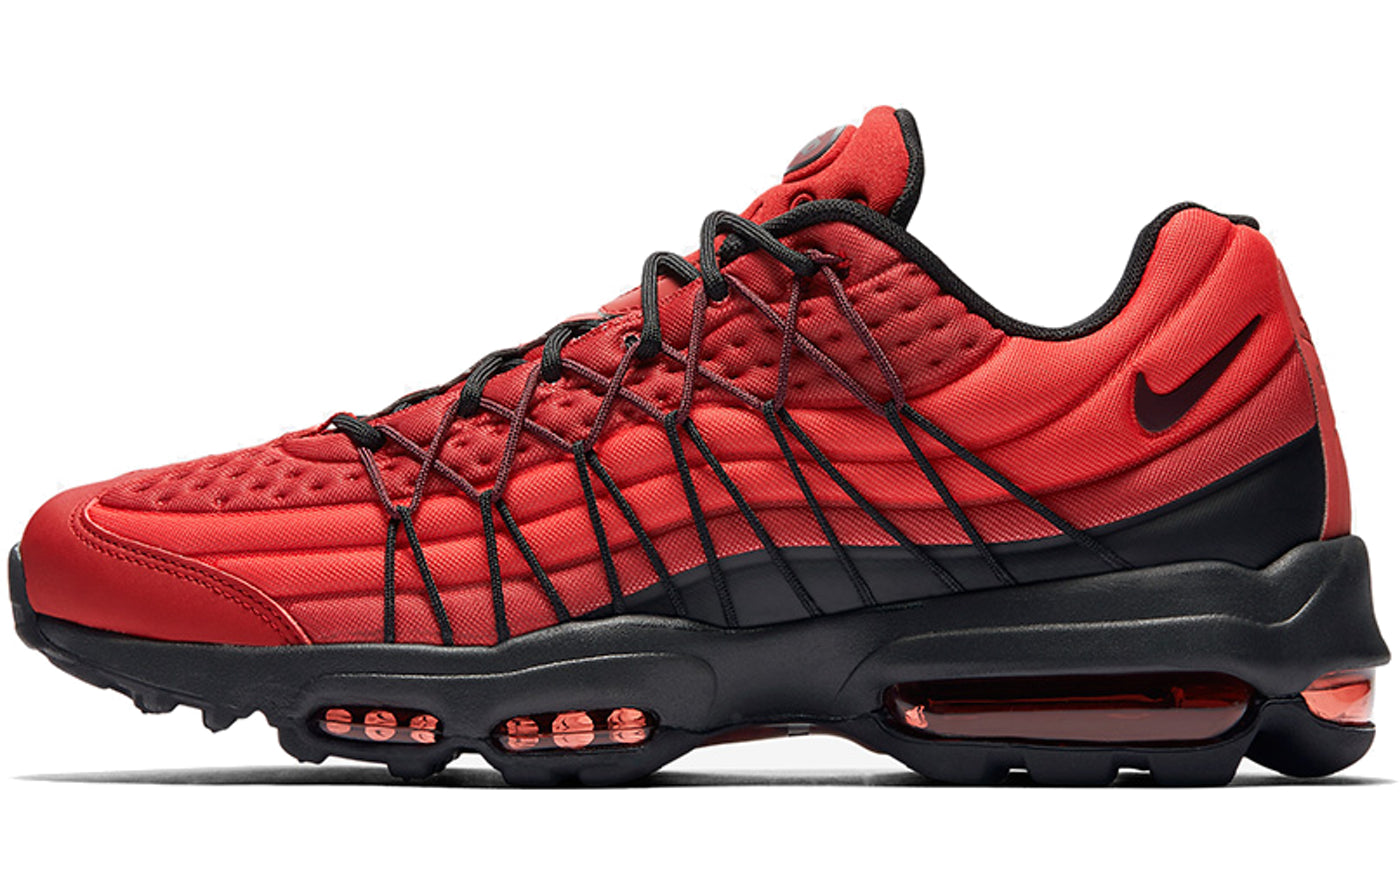 Nike Air Max 95 Ultra SE Gym Red 845033-600 sneakmarks